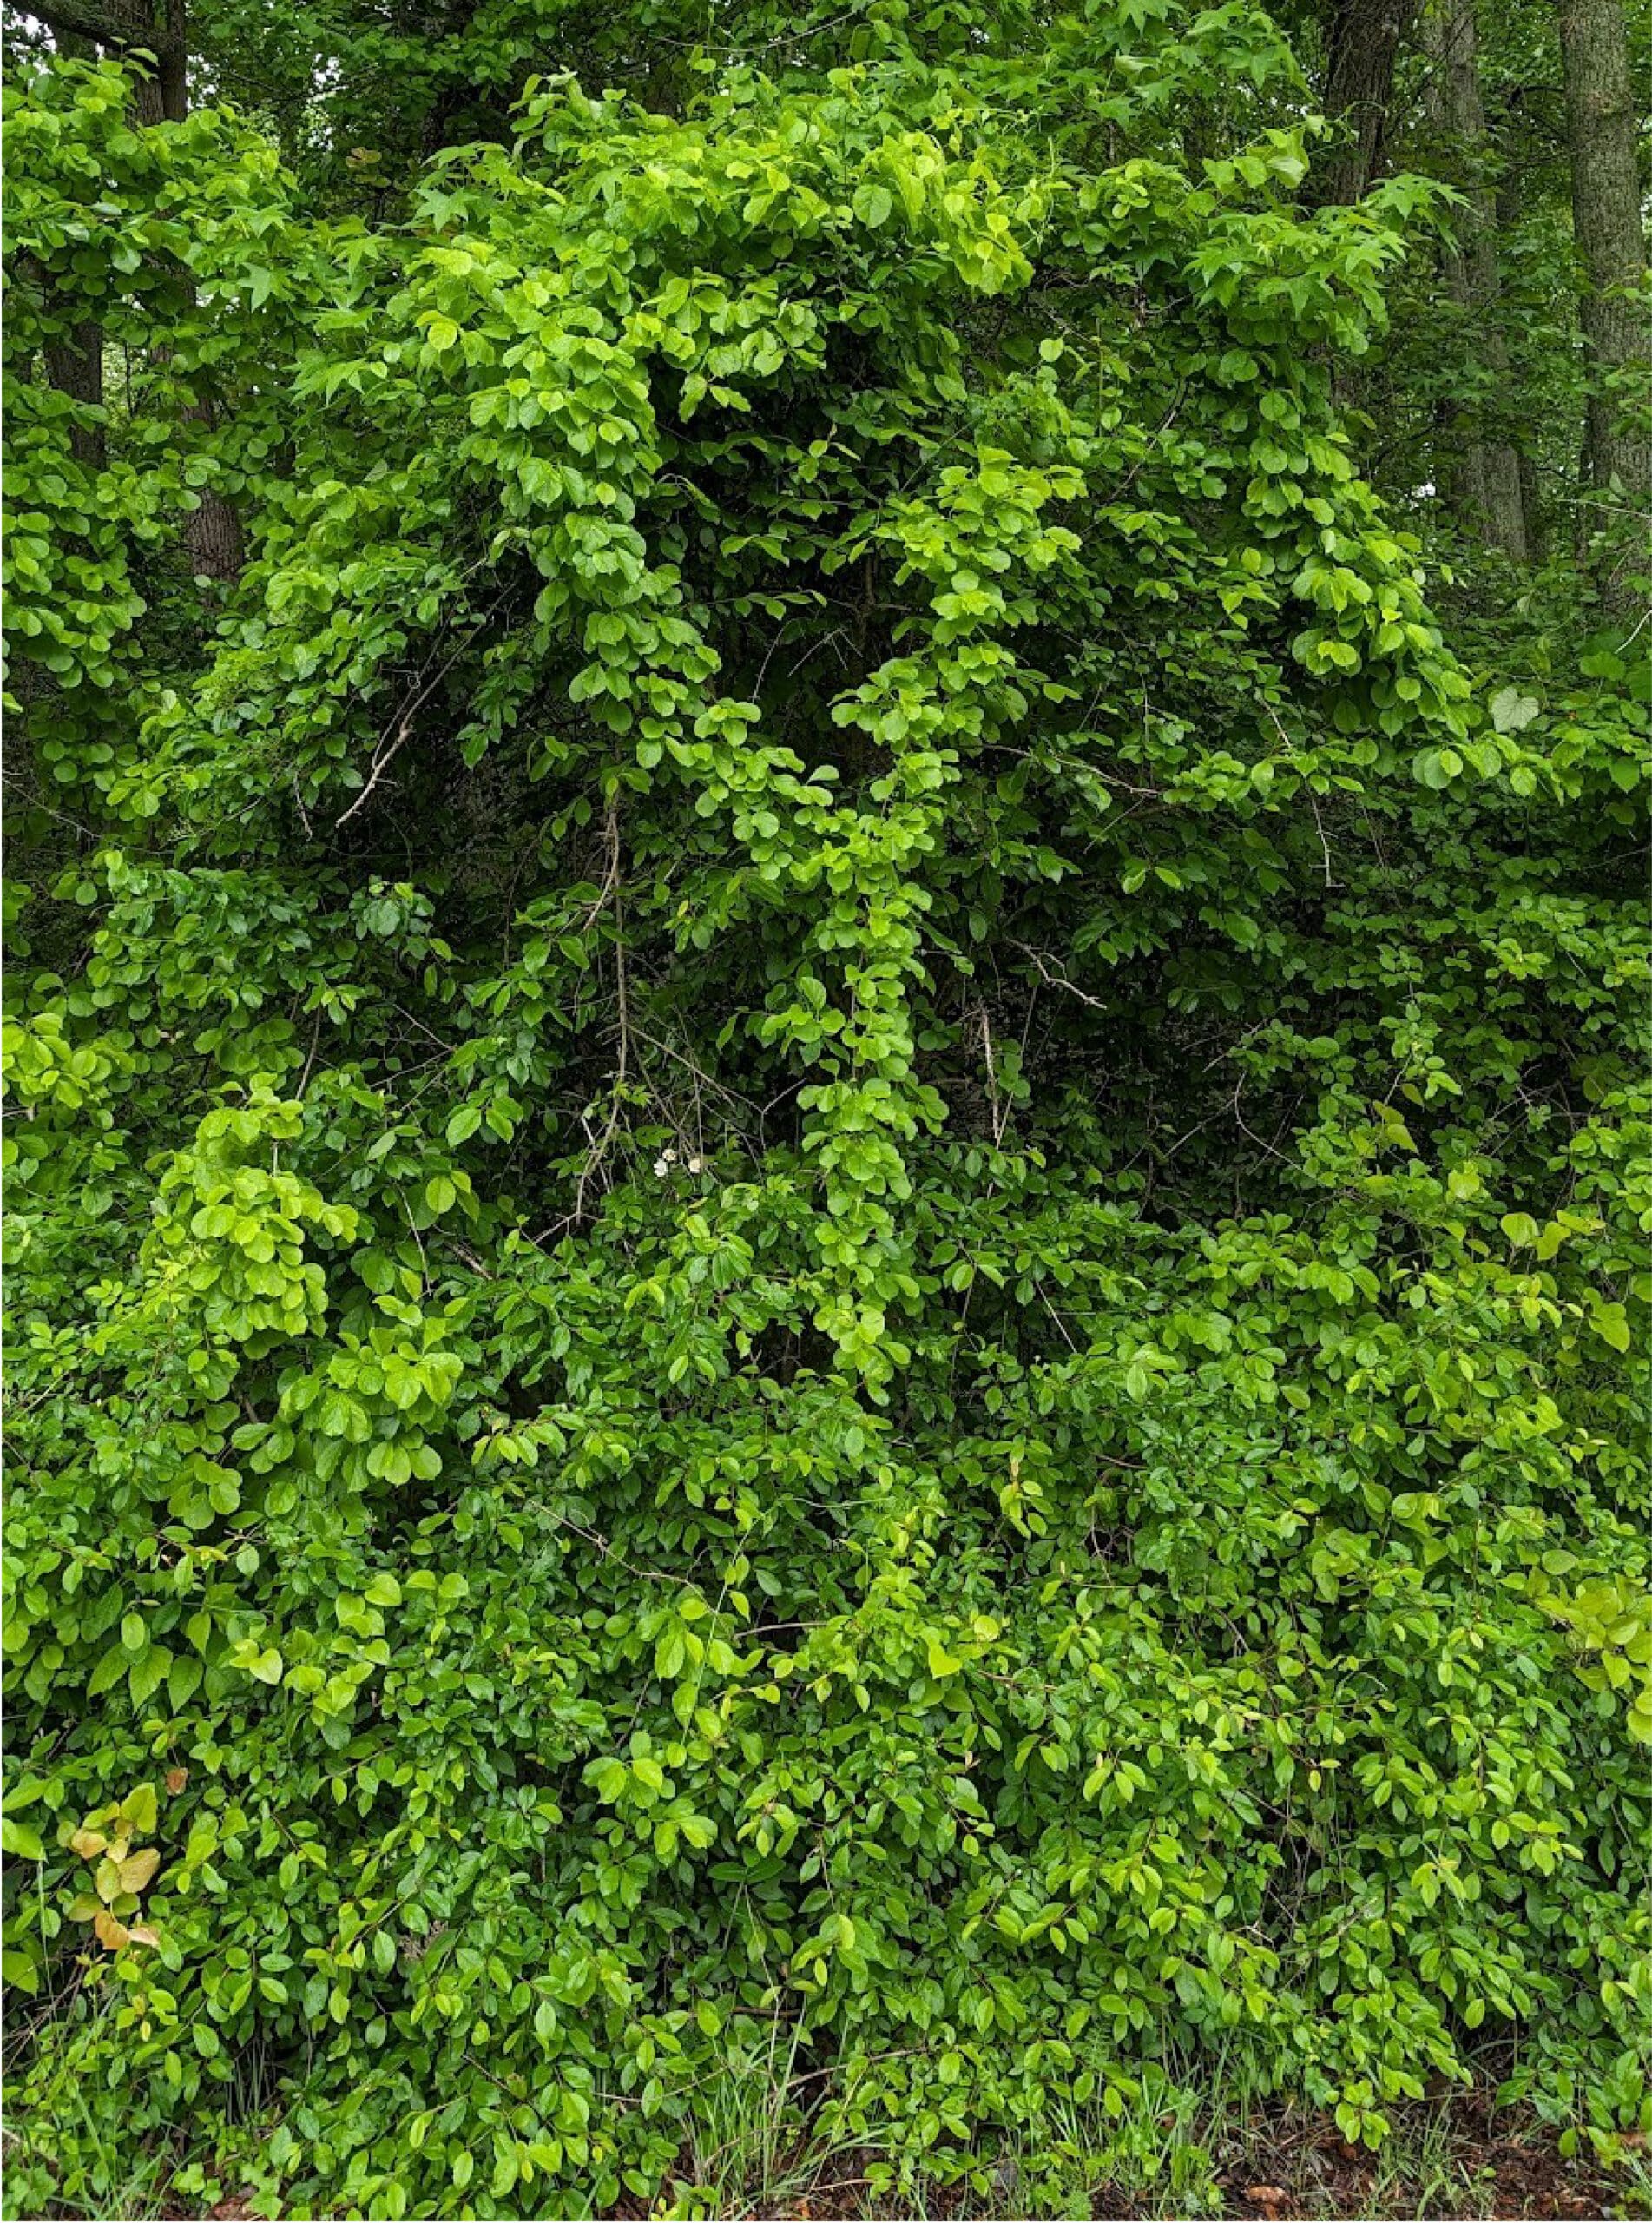 A dense patch of vines covering the ground and climbing surrounding plants